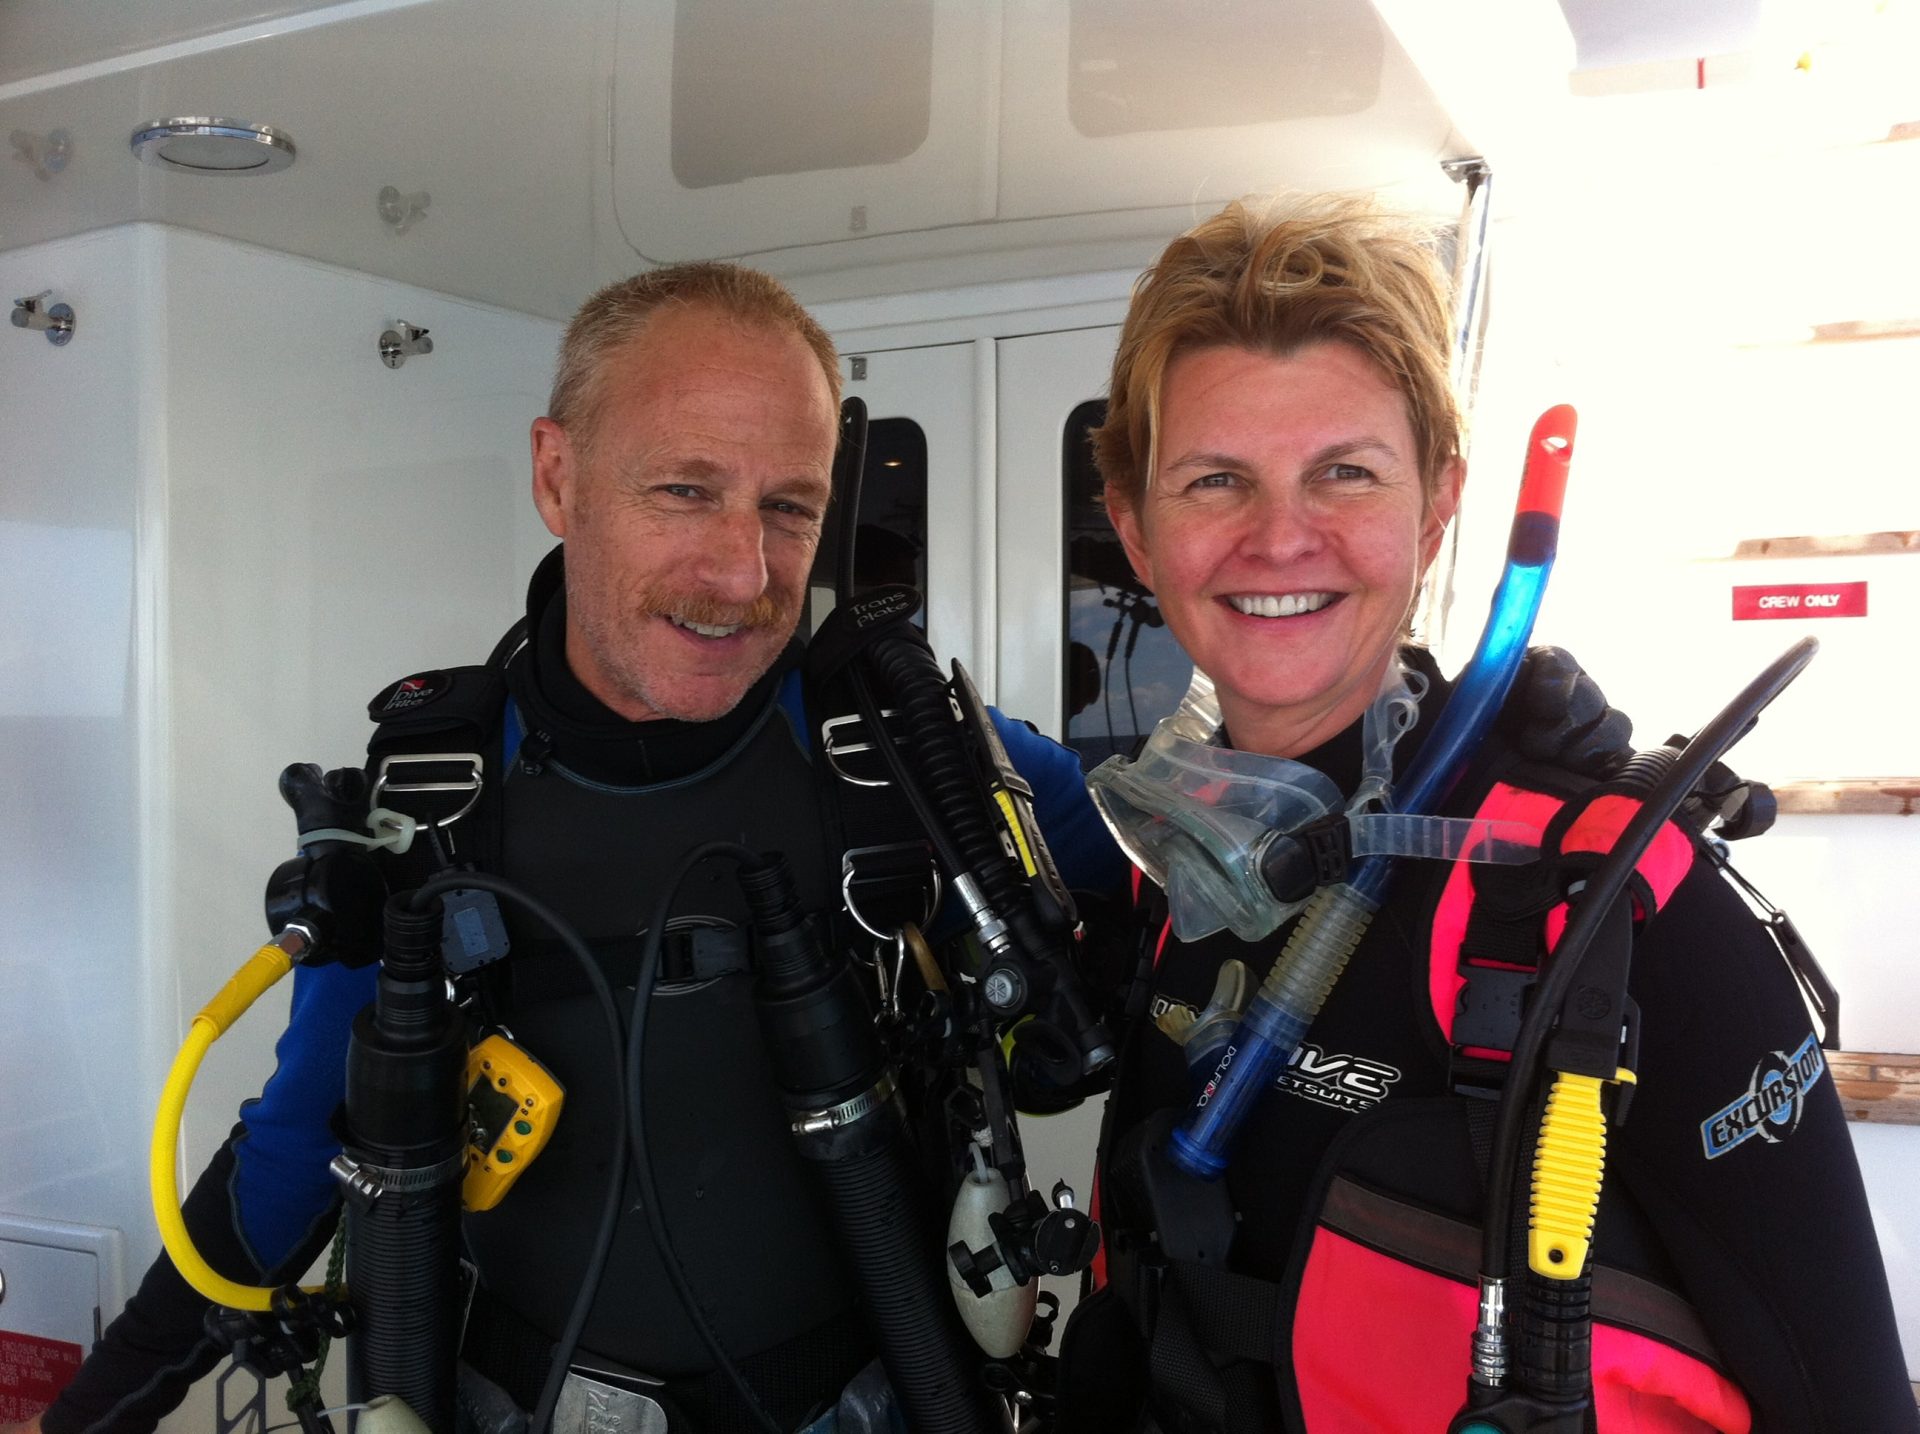 SeaLight Pictures' owners and founders, Adam Geiger and Colette Beaudry, at the Great Barrier Reef